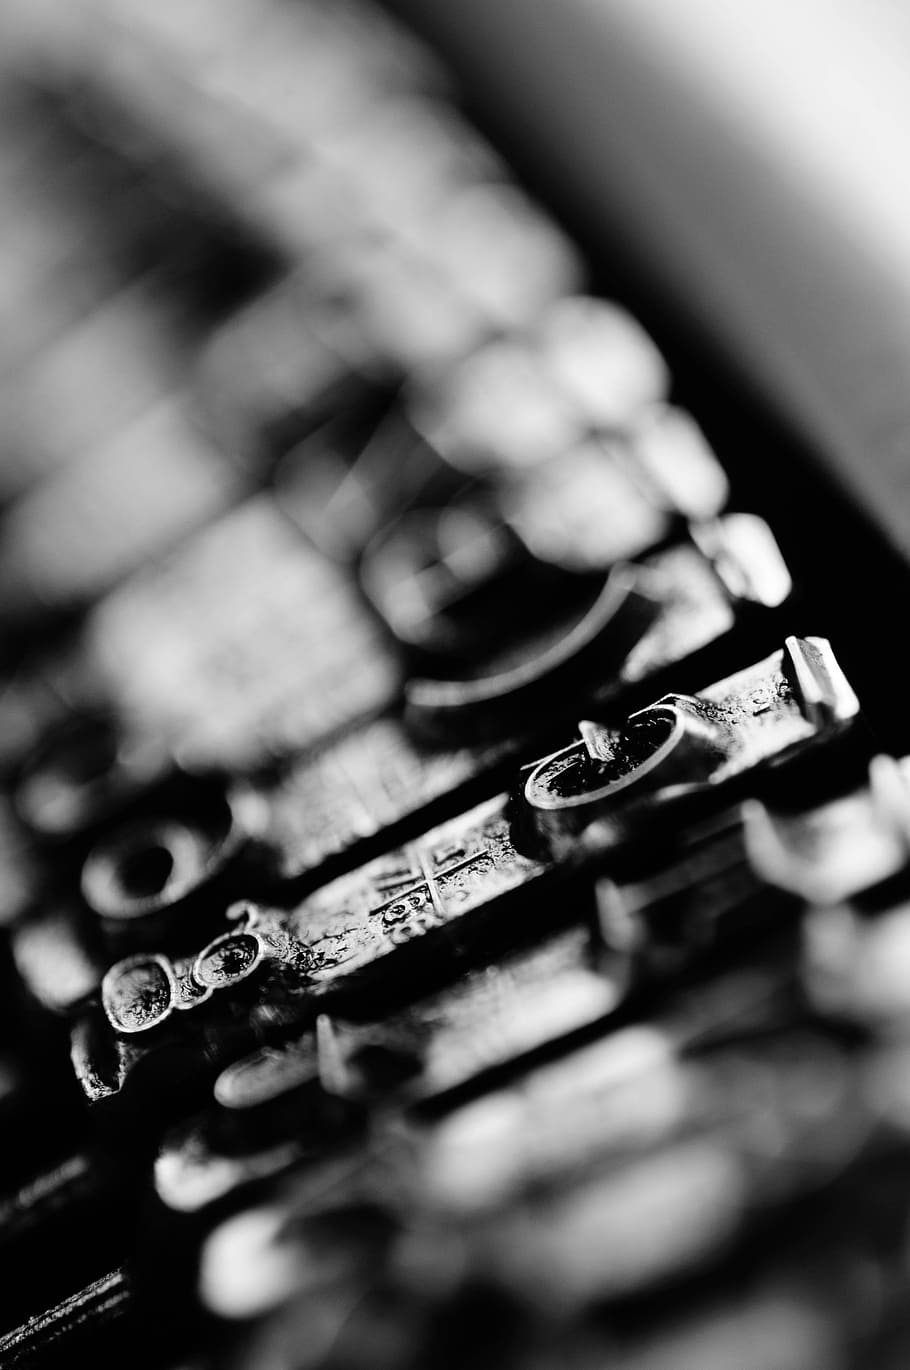 typewriter, types, black white, selective focus, close-up, indoors, safety, electronics industry, equipment, metal